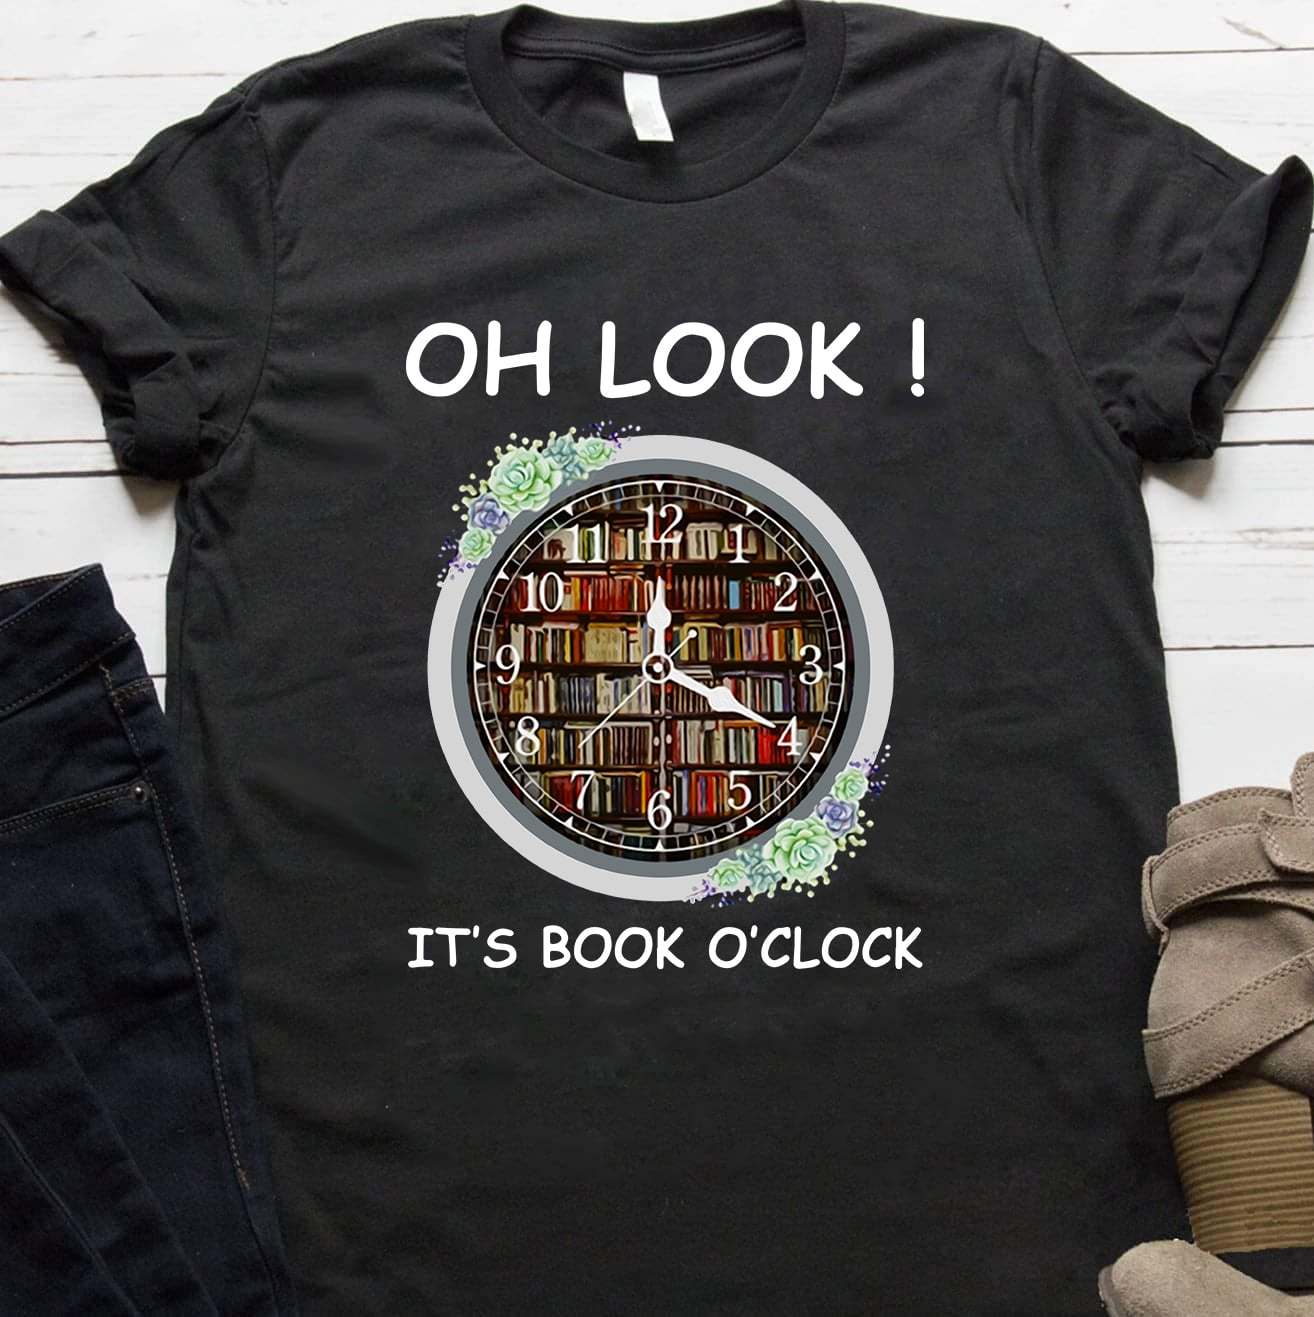 Oh look it's book o'clock - Book lover, book shelves